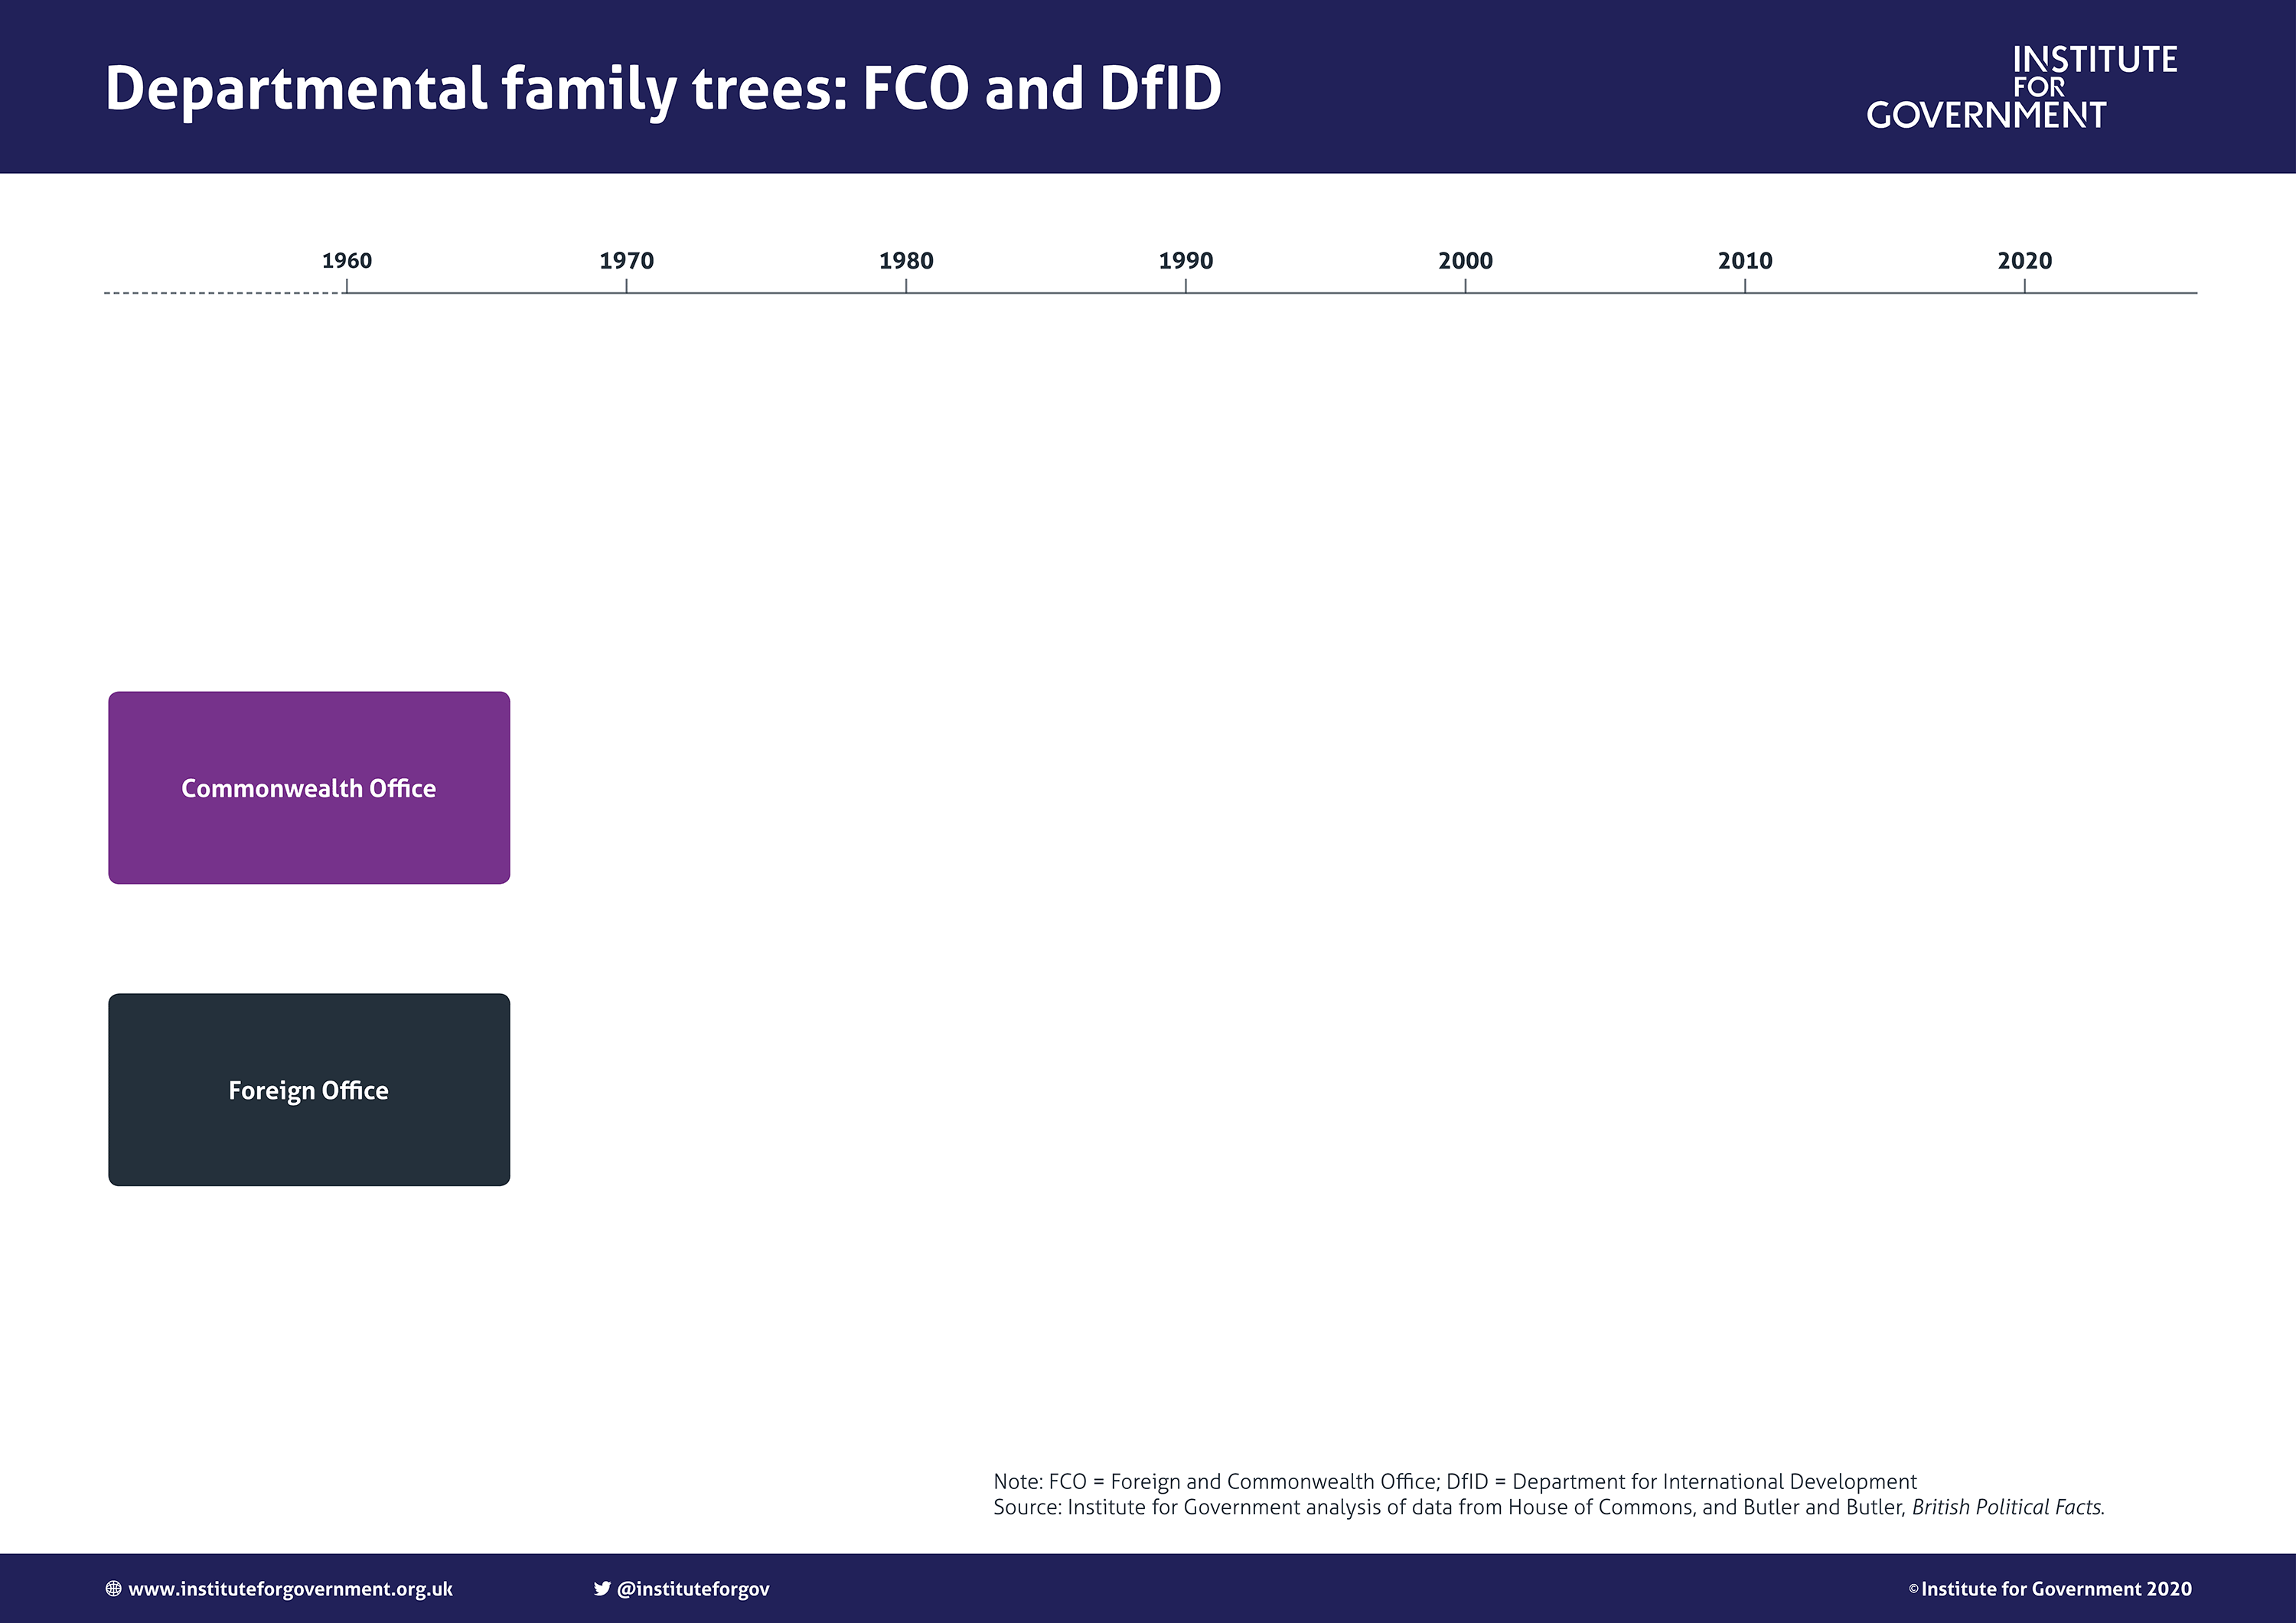 FCO and DFID over time